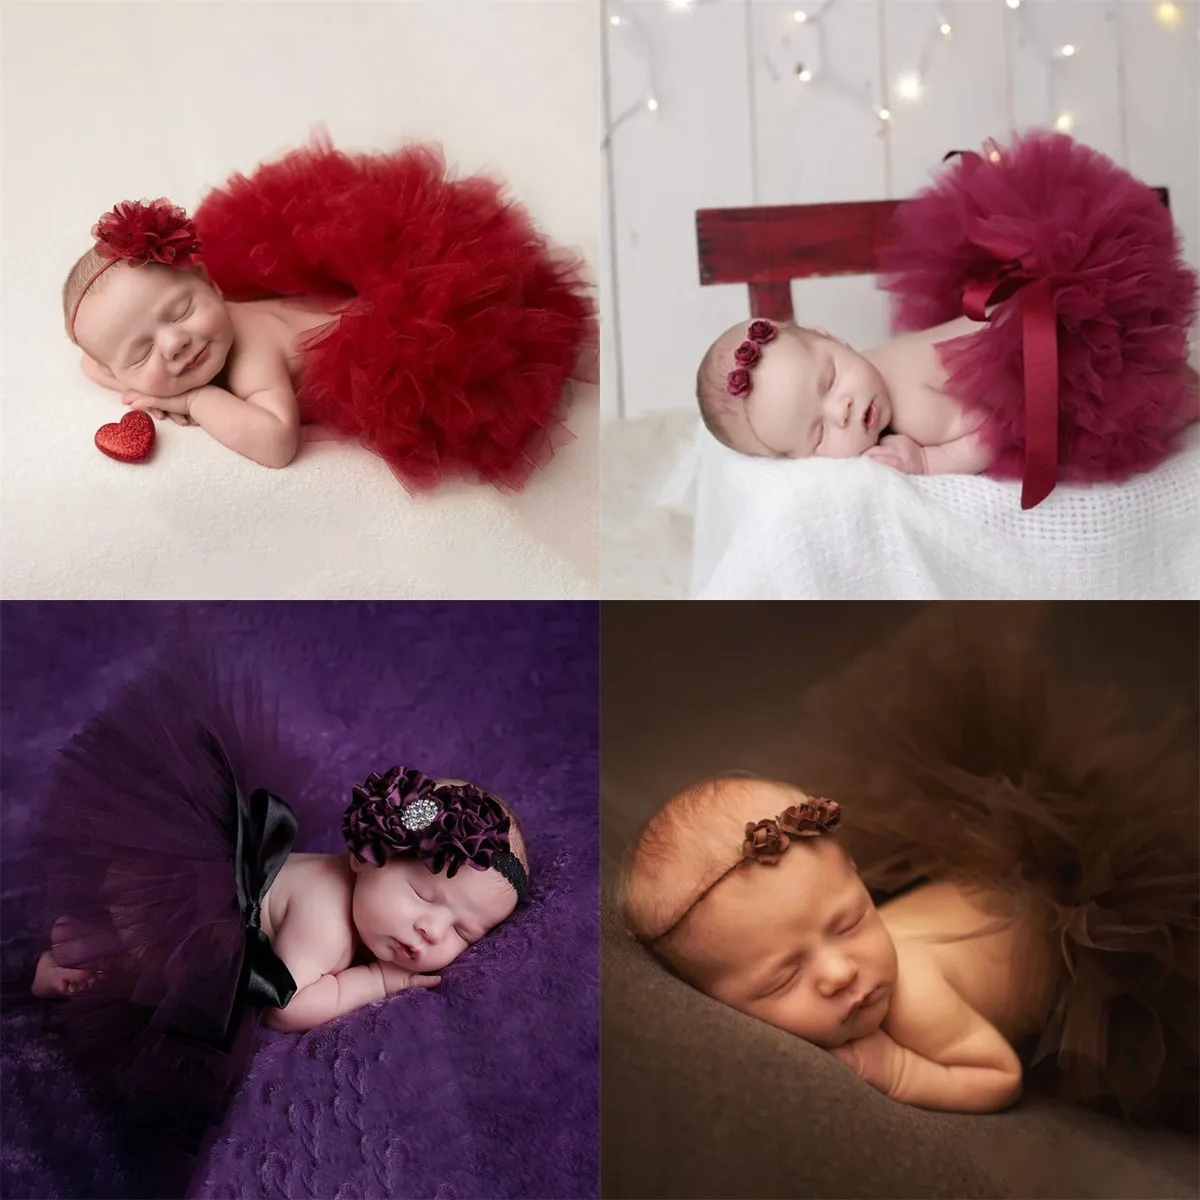 2 Pcs Newborn Photography Props Outfit Baby Tulle Tutu Skirts Headband Set Infants Photo Shooting Cute Flower Hair Band